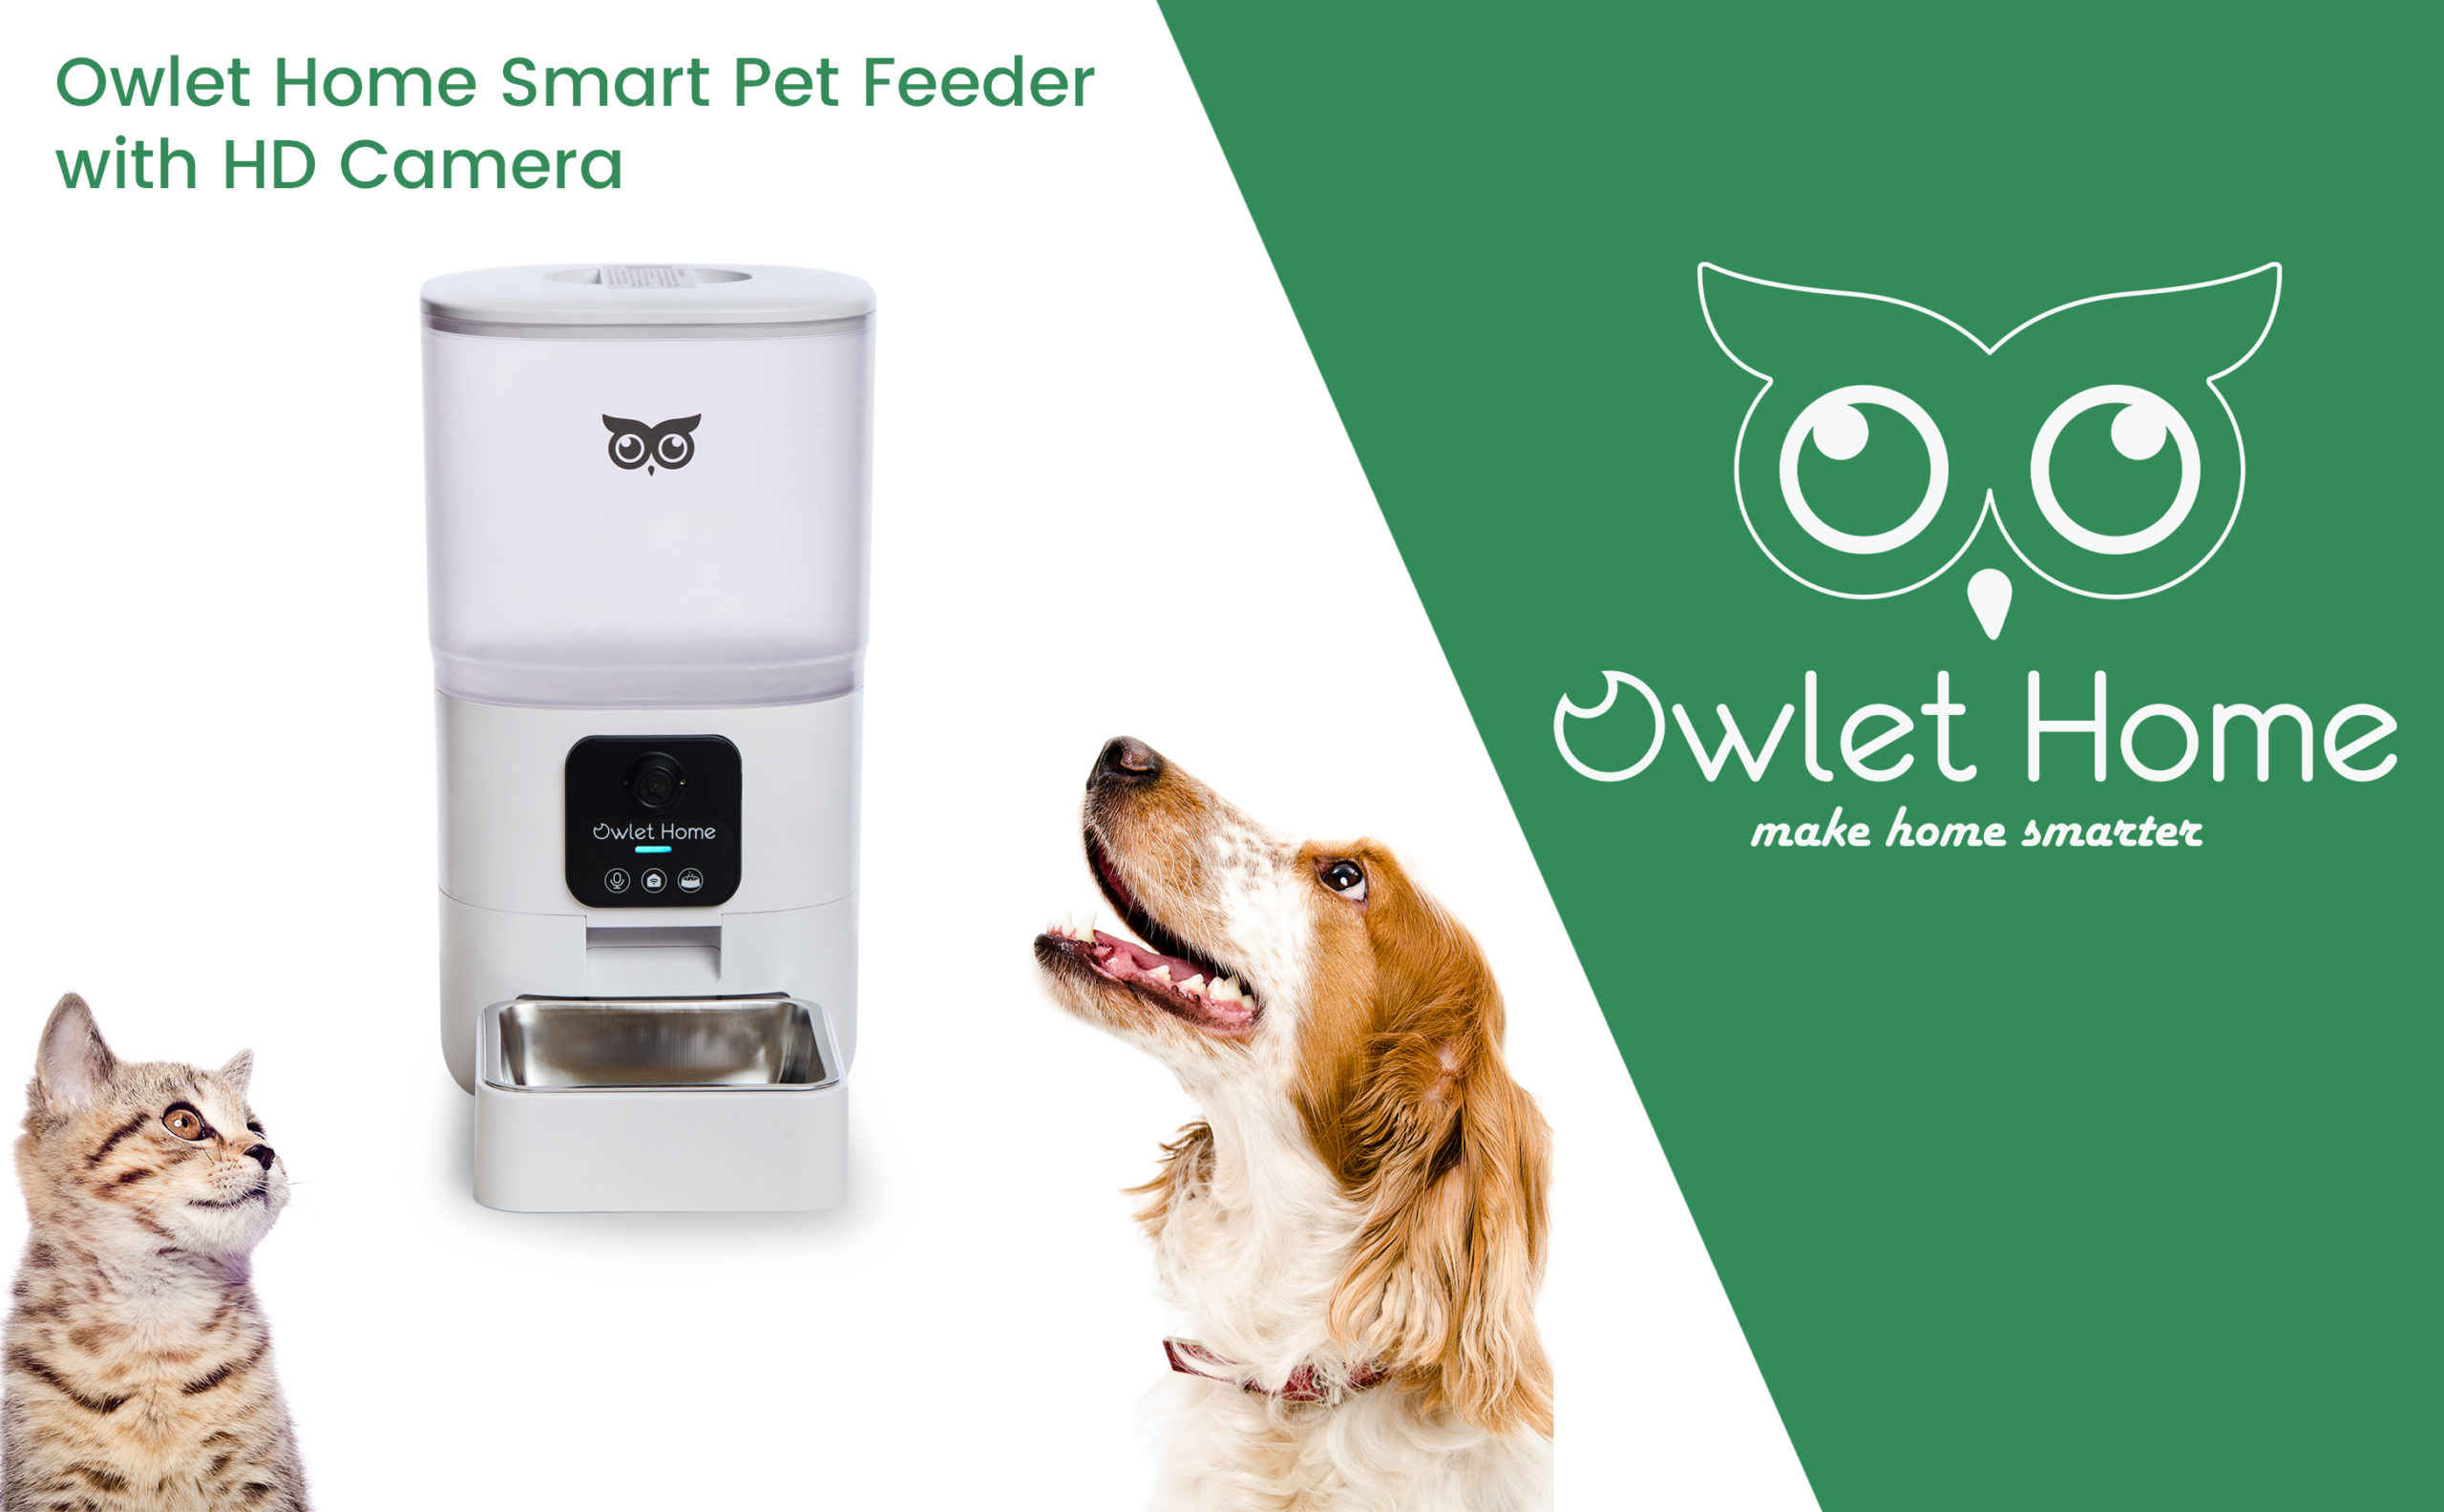 Owlet Home Smart Automatic Pet Feeder with 1080P HD Camera for Cats & Dogs  (3.5L), WiFi(2.4GHz&5GHz), Live Video, Auto Night Vision, 2-Way Audio